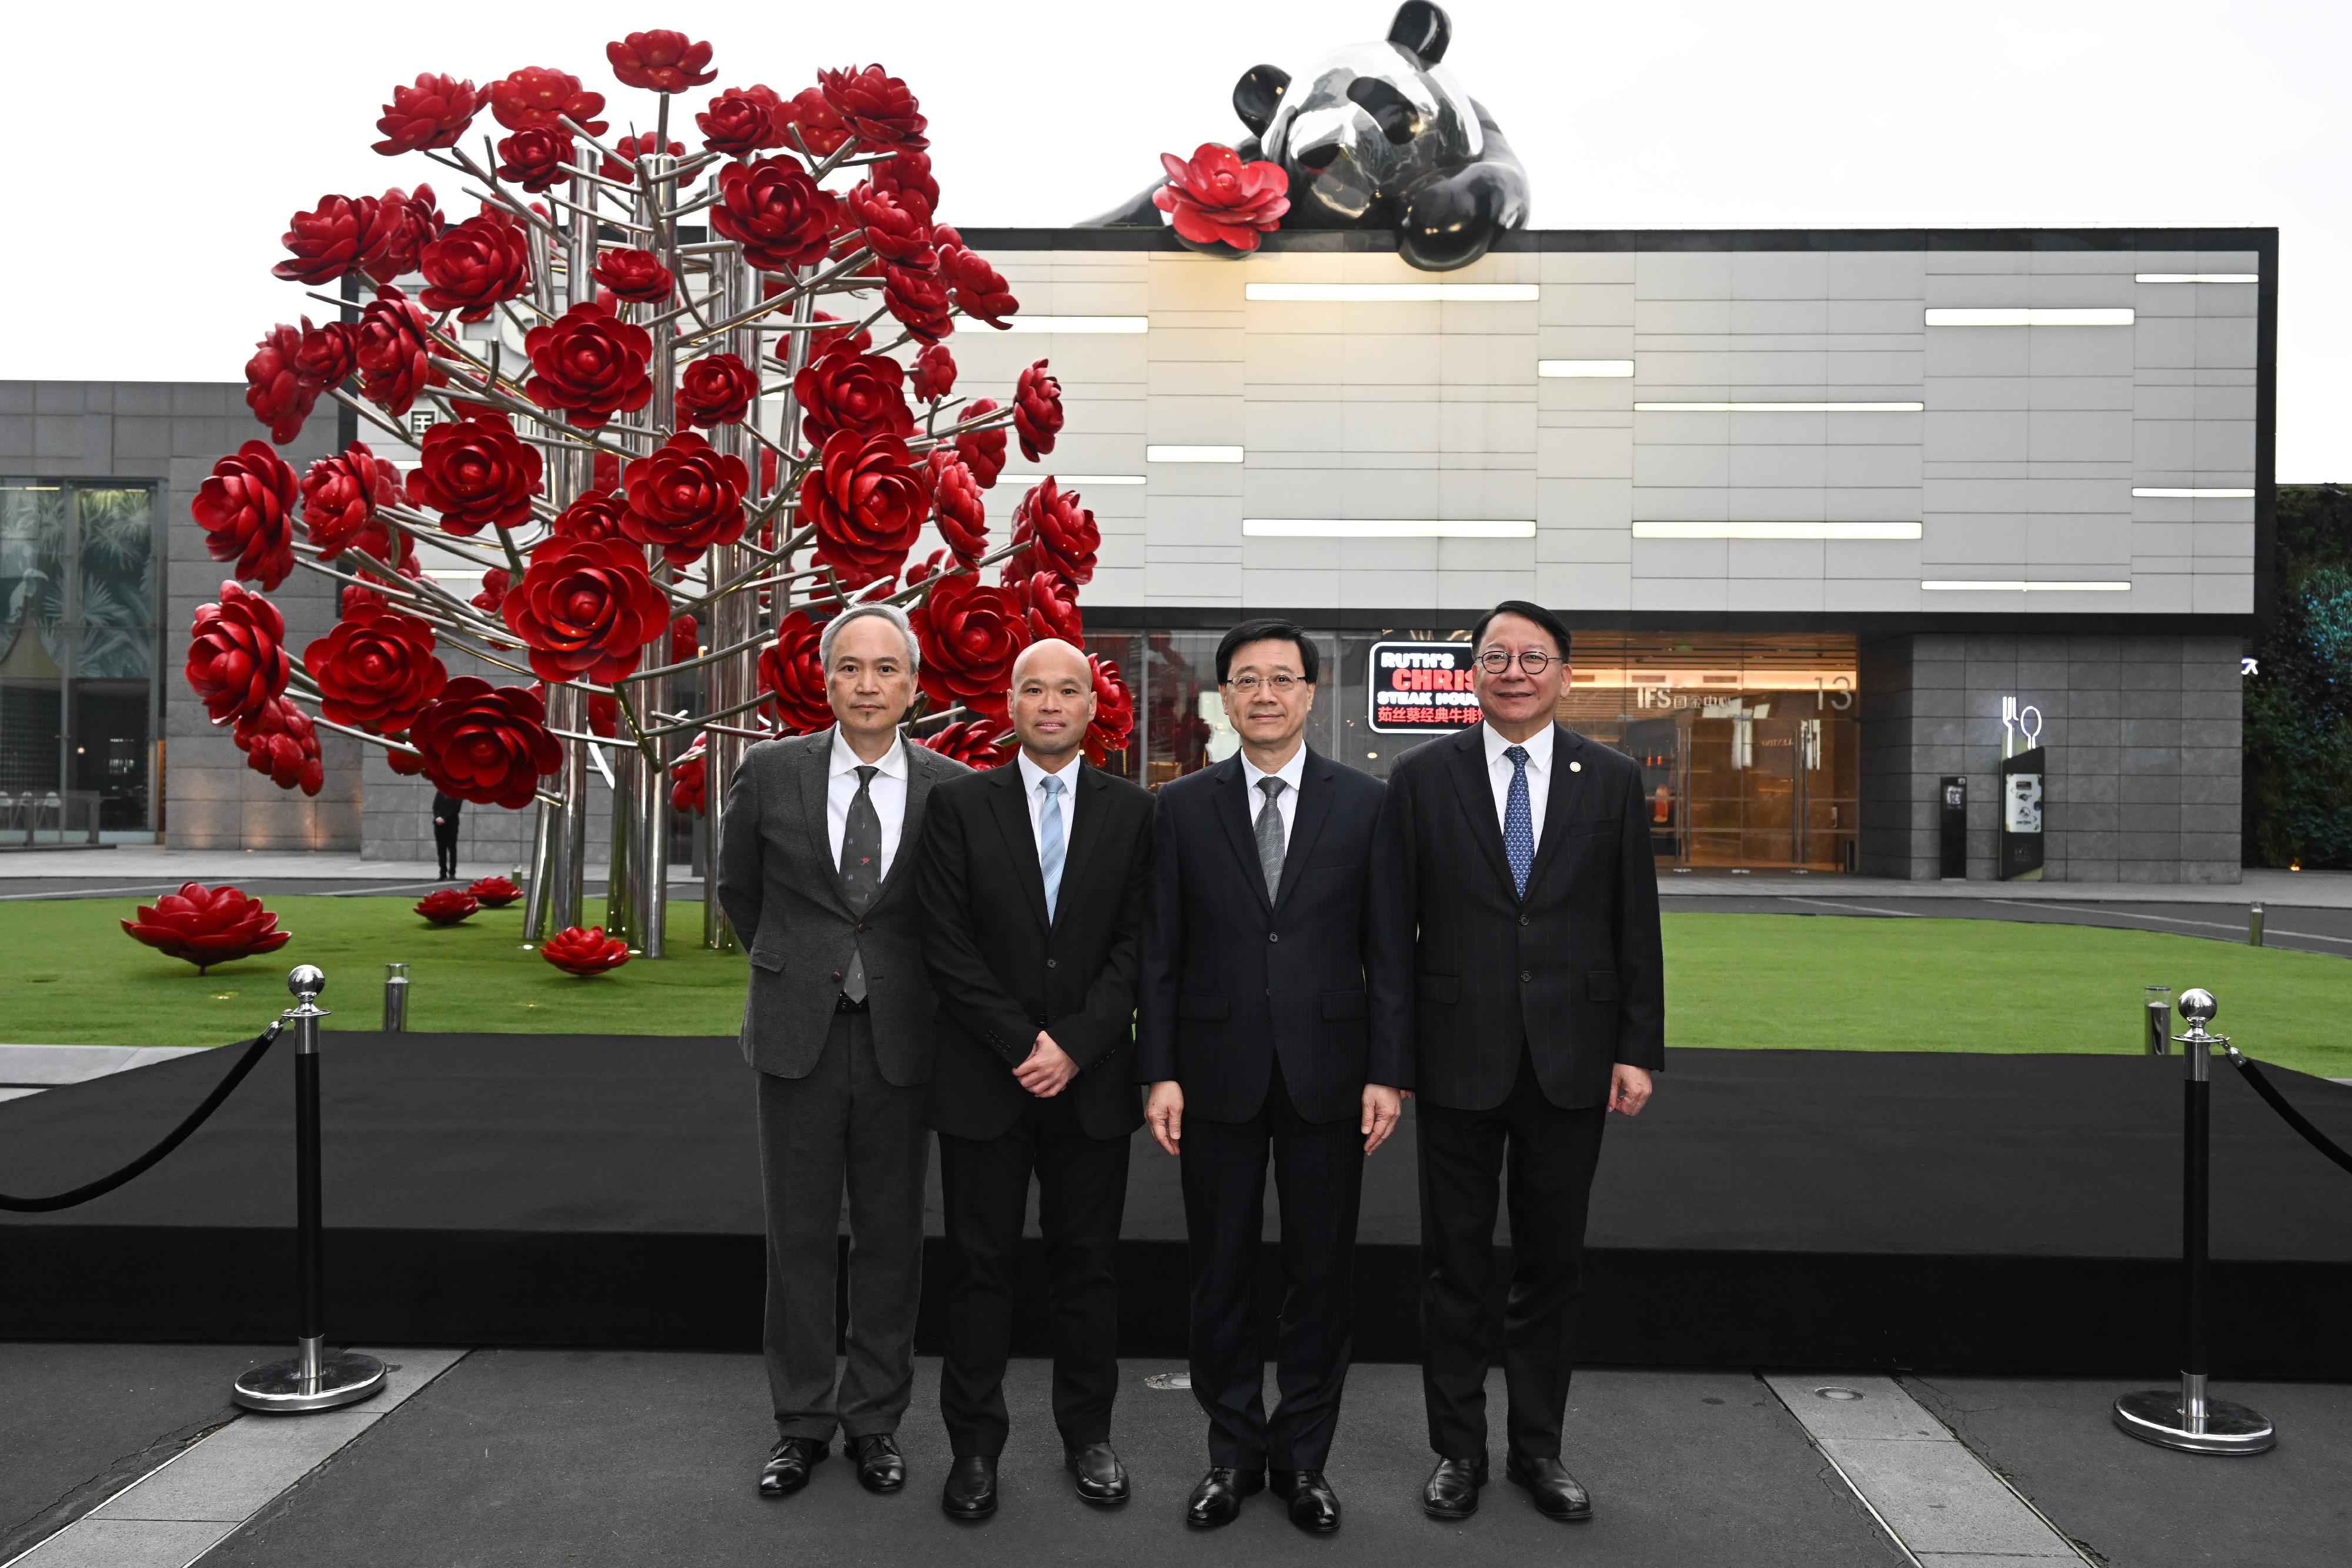 The Chief Executive, Mr John Lee, arrived in Chongqing today (May 10) with his delegation and visited the Chongqing International Finance Square (IFS). Photo shows Mr Lee (second right) and the Chief Secretary for Administration, Mr Chan Kwok-ki (first right), in a group photo with the Hong Kong representatives of the IFS.